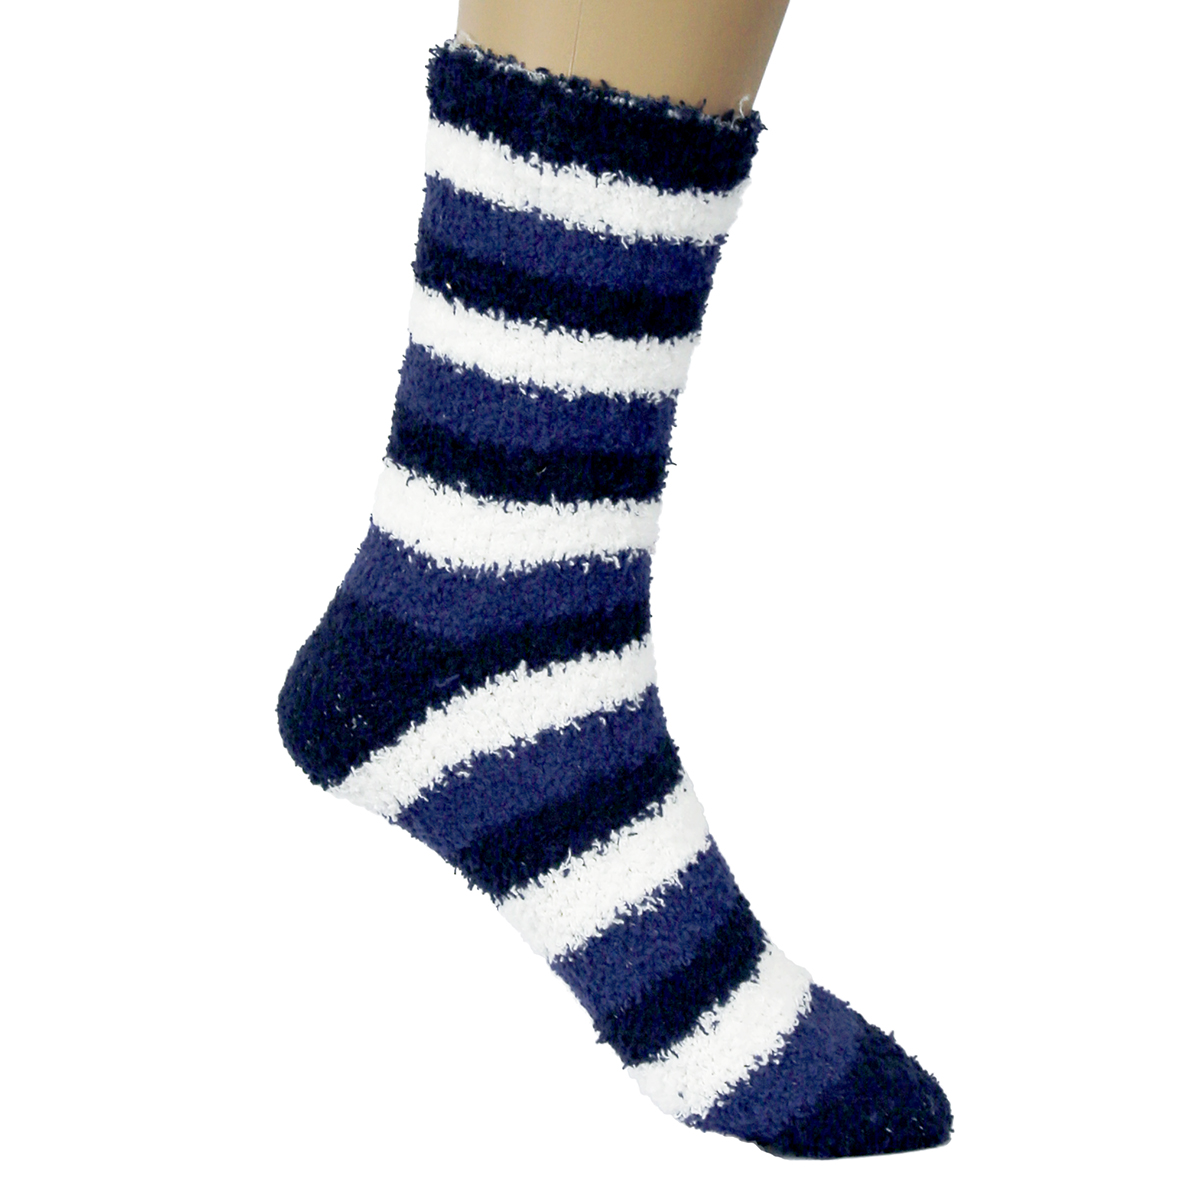 New Mens Warm Fuzzy Socks Striped Cool Fluffy Colorful Winter ...